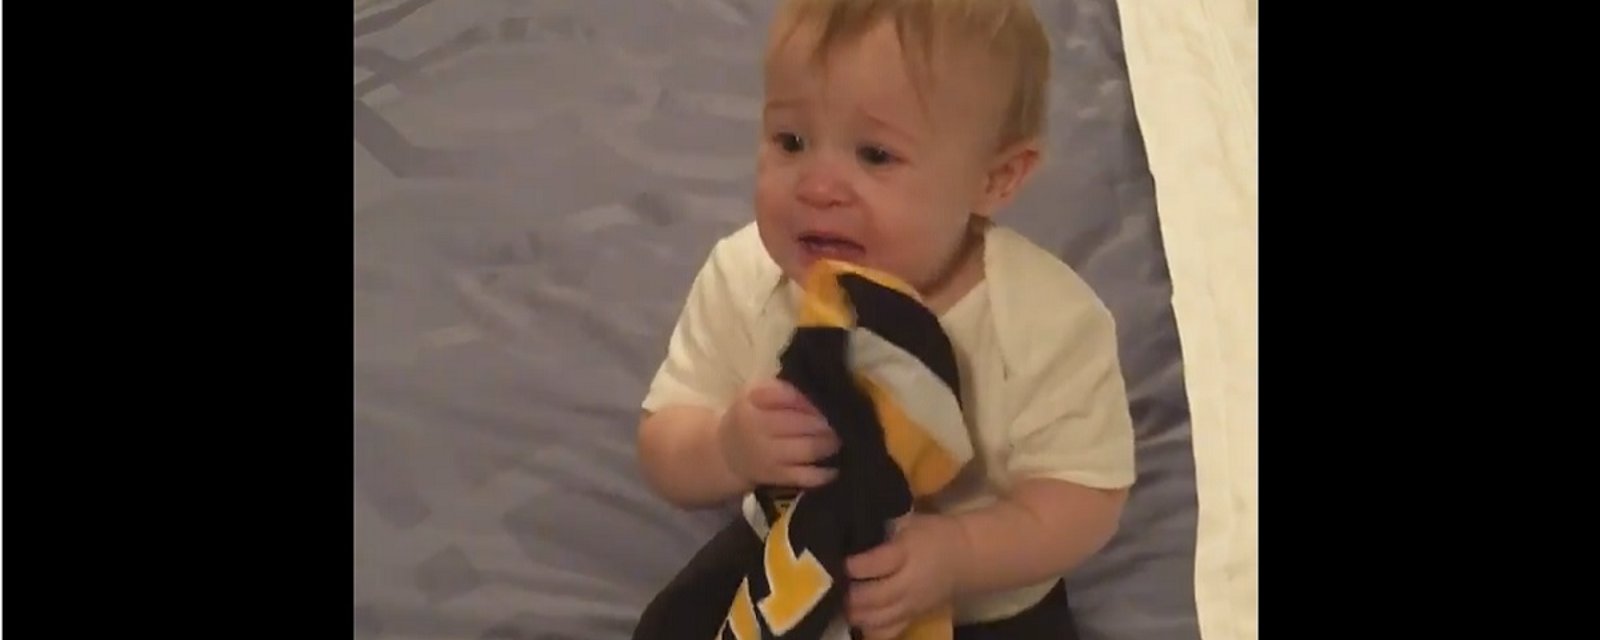 Little girl throws a tantrum when parents try to take away her favorite NHL jersey.